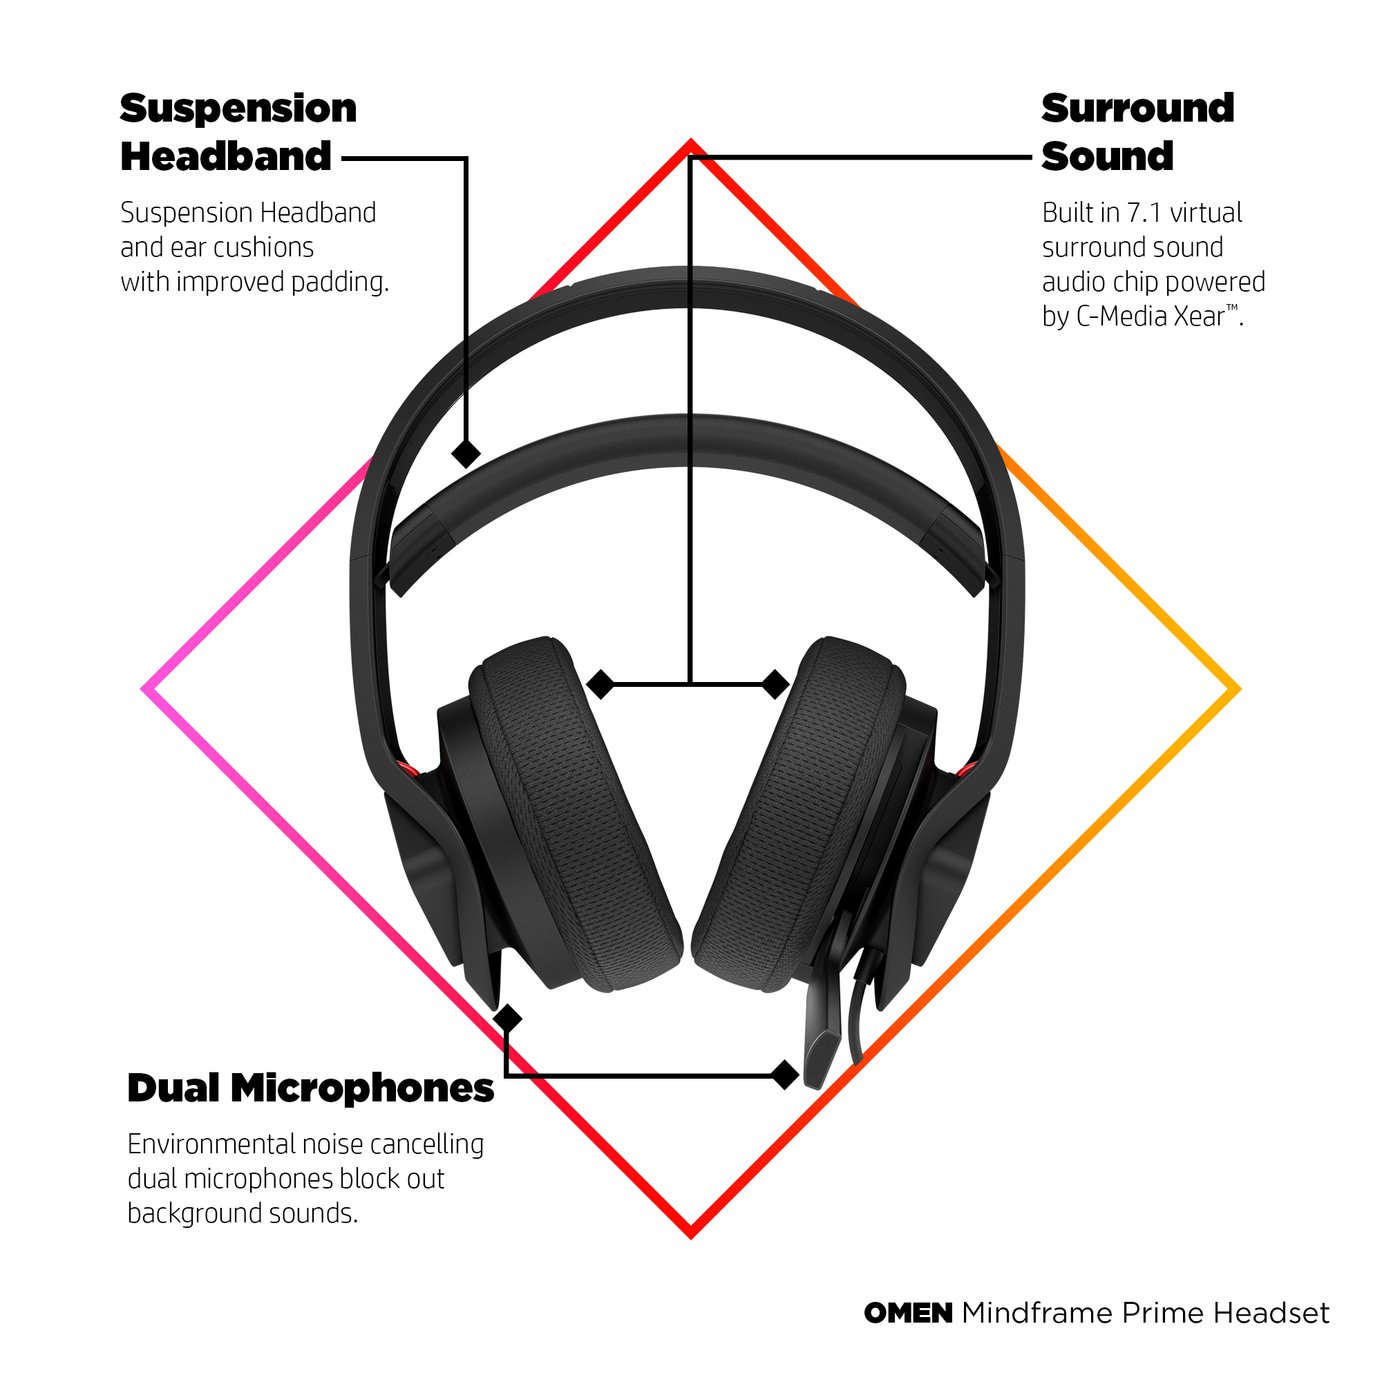 HP Omen Mindframe Prime Gaming Headset Review